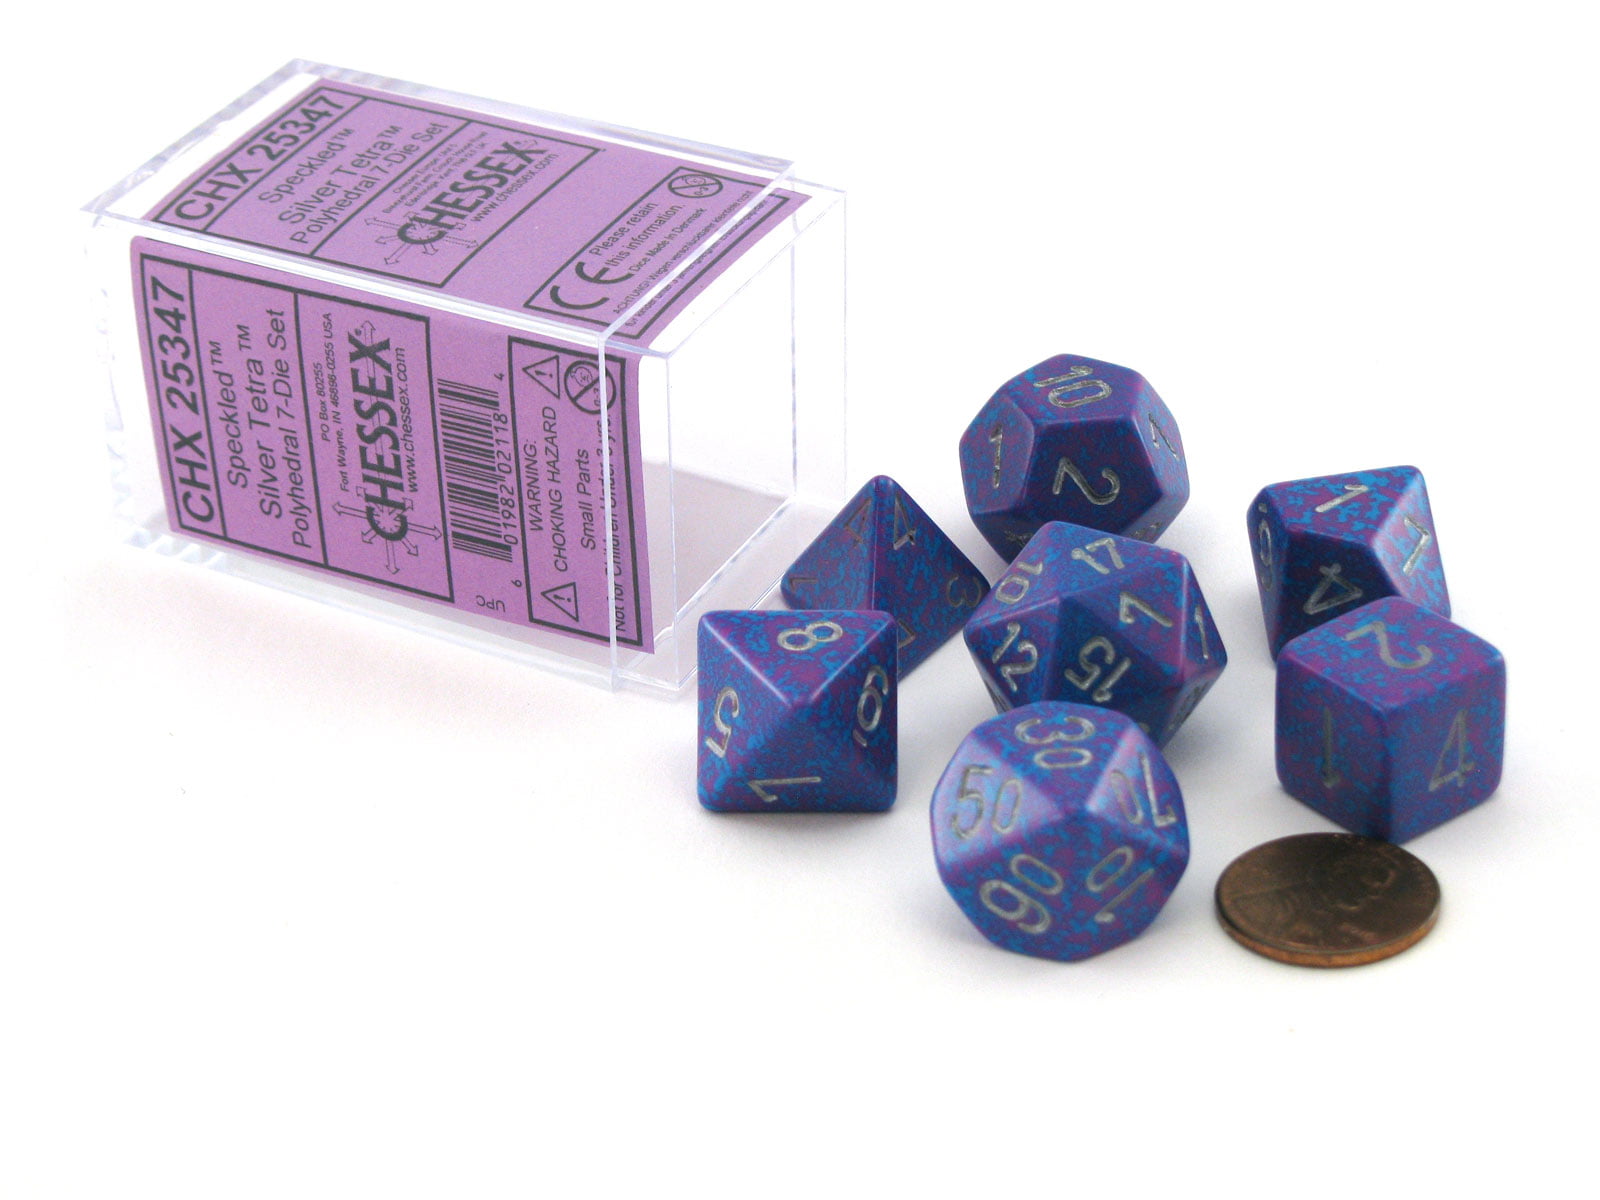 6 Pieces Speckled 16mm Tens D10 Chessex Dice 00-90 Granite 